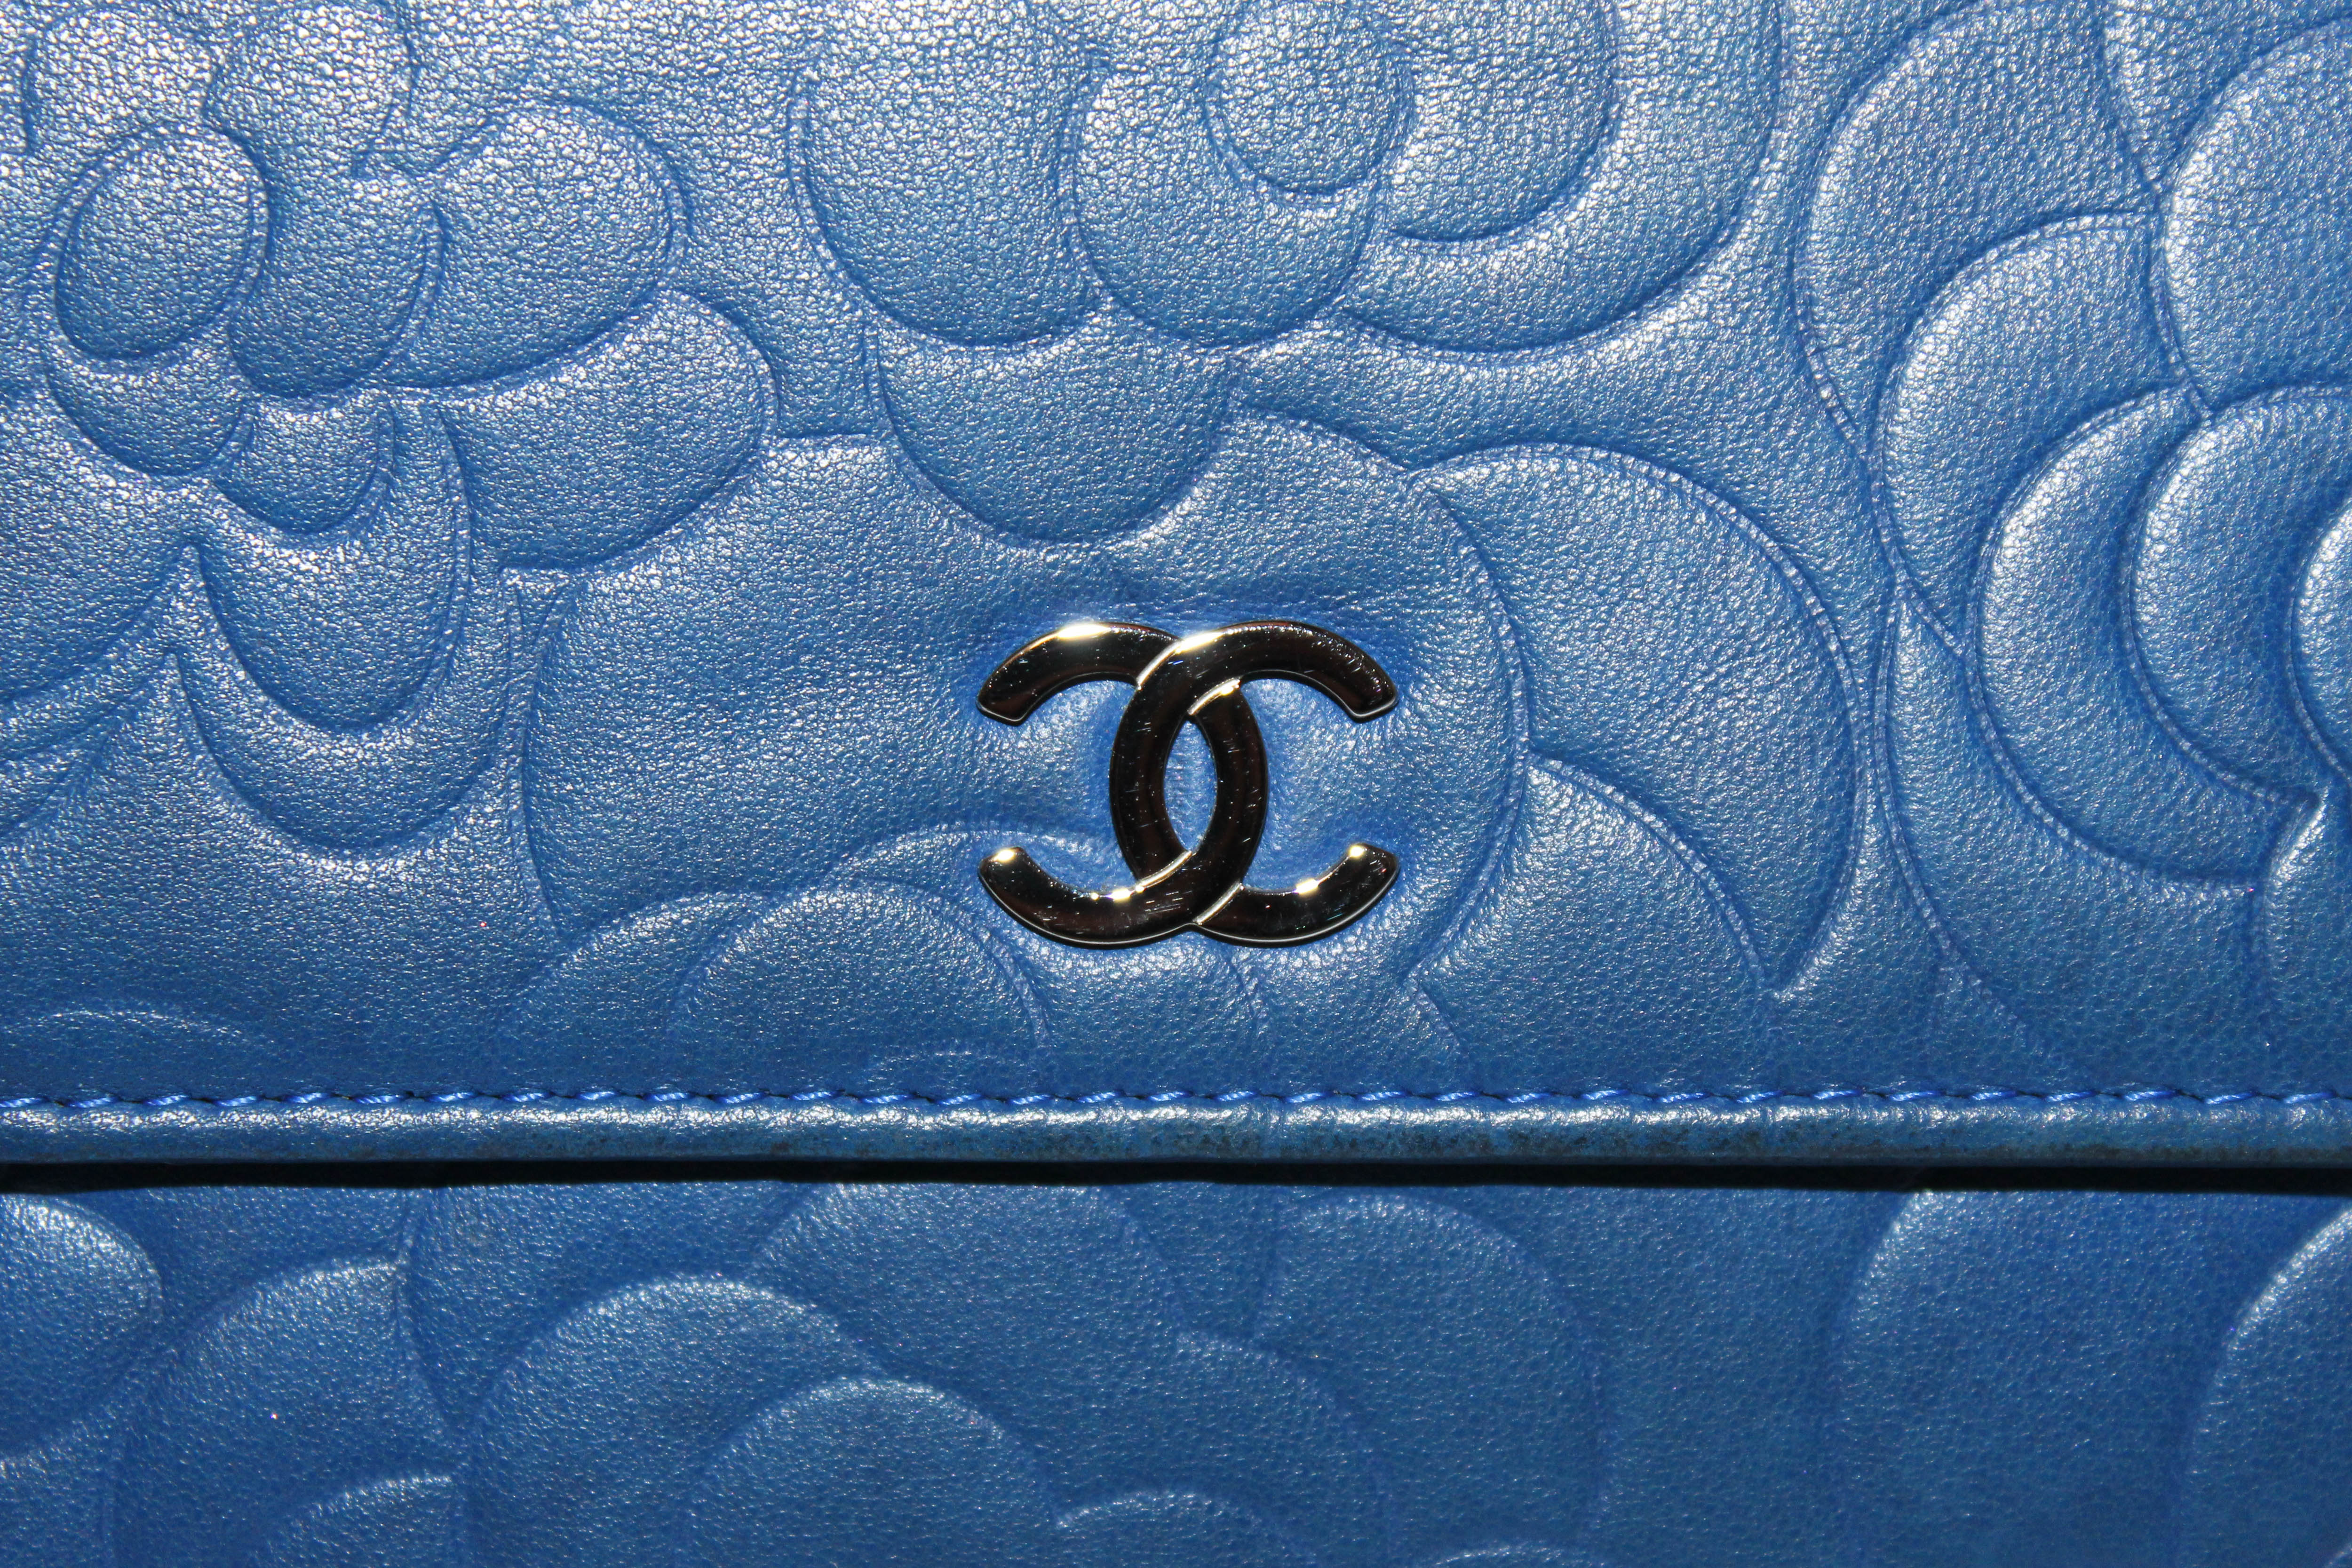 Chanel Porte Passeport Small leather goods 377665